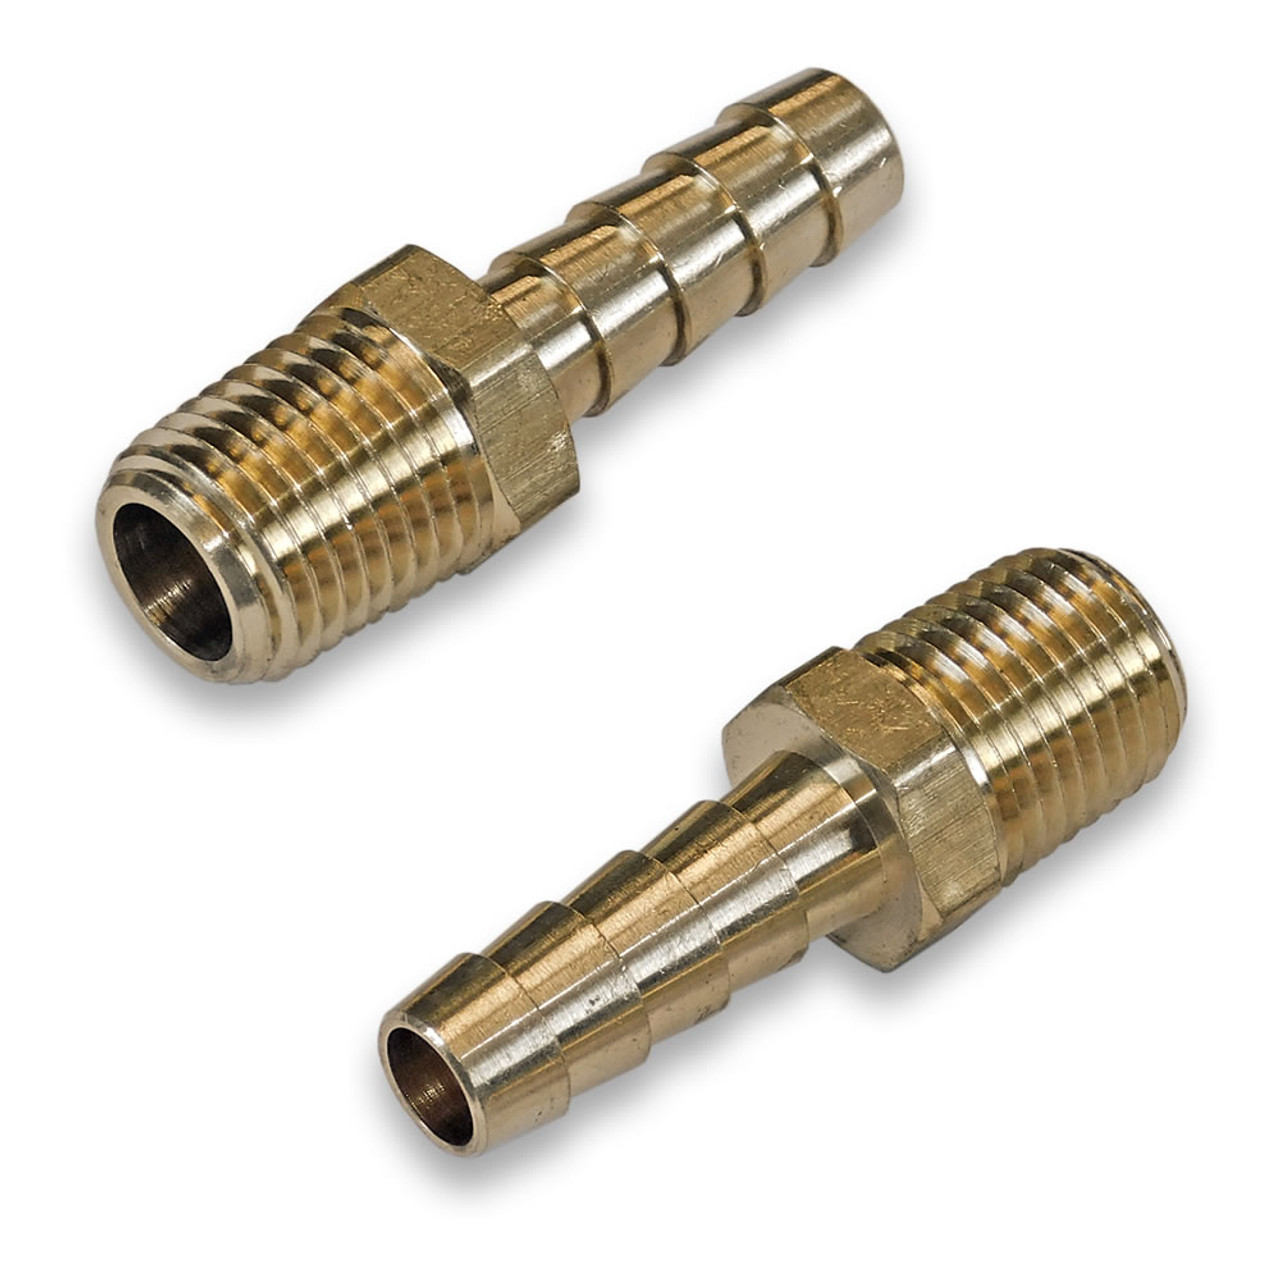 Brass Hose Barb Fittings – Male Pipe Thread Adapters